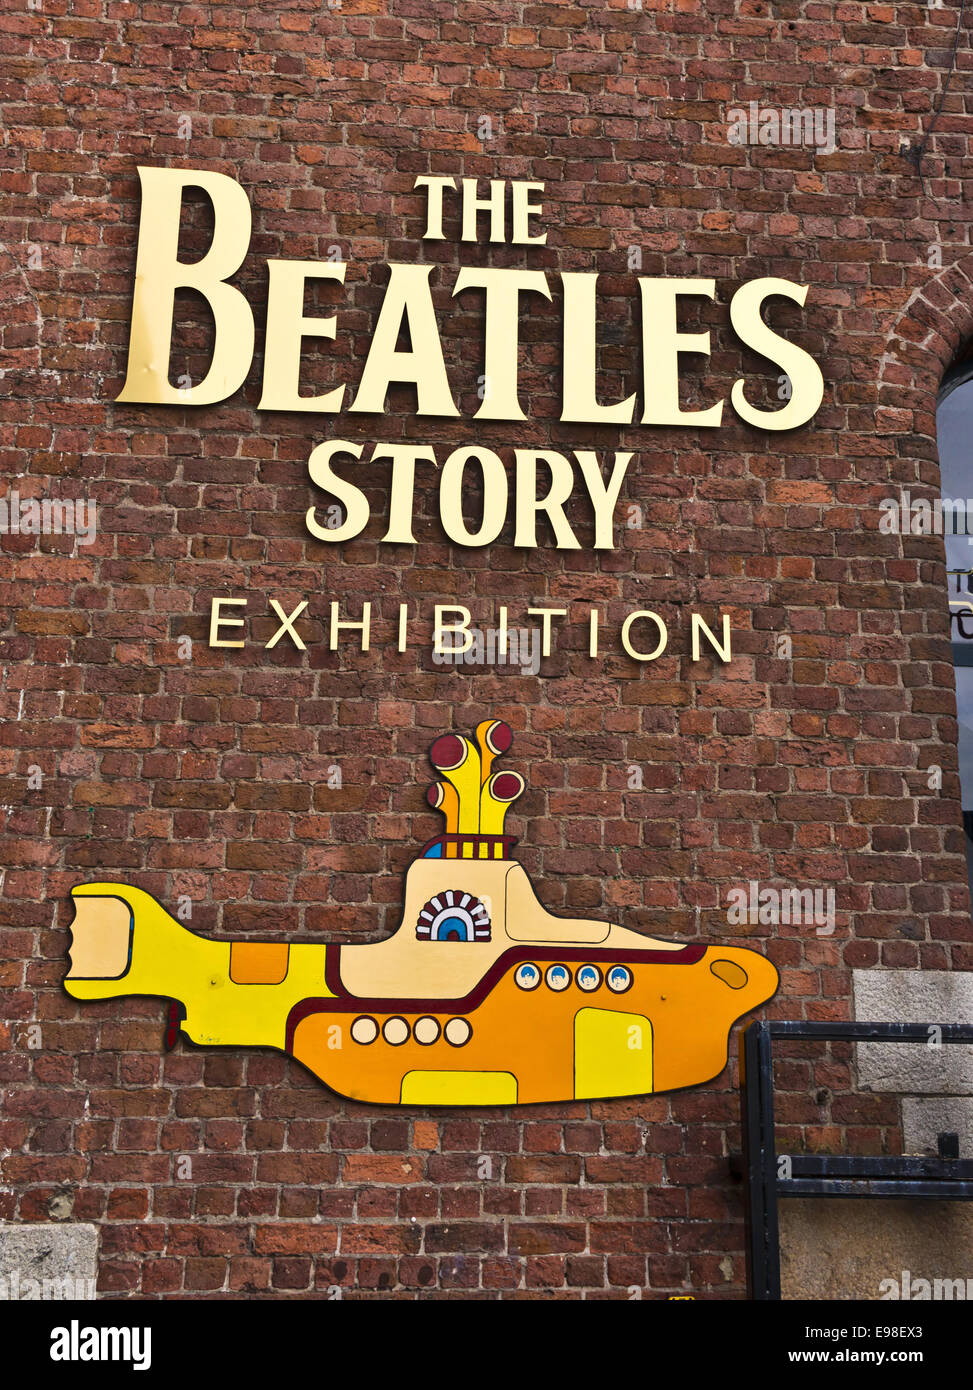 The Beatles Story is a visitor attraction dedicated to the 1960s rock group The Beatles in Liverpool. Stock Photo